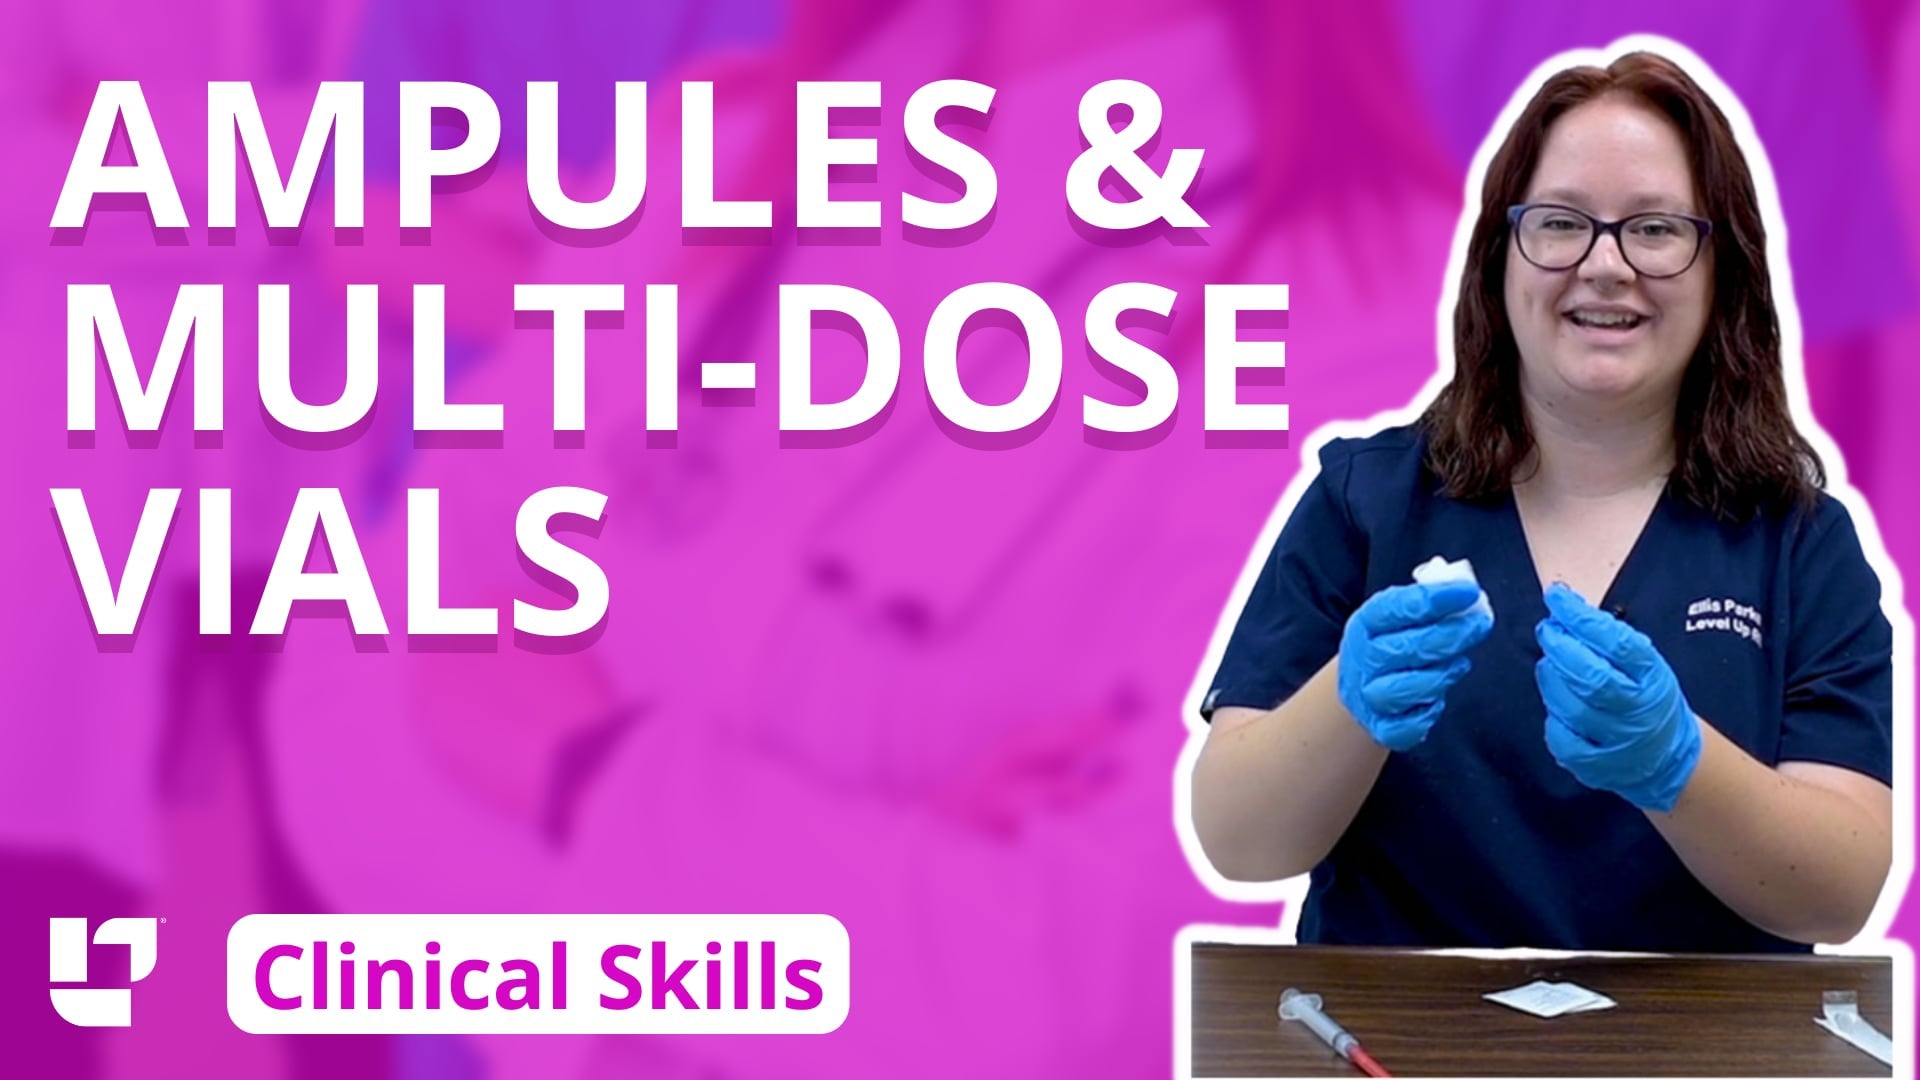 Clinical Skills - Using Ampules and Multidose Vials - LevelUpRN